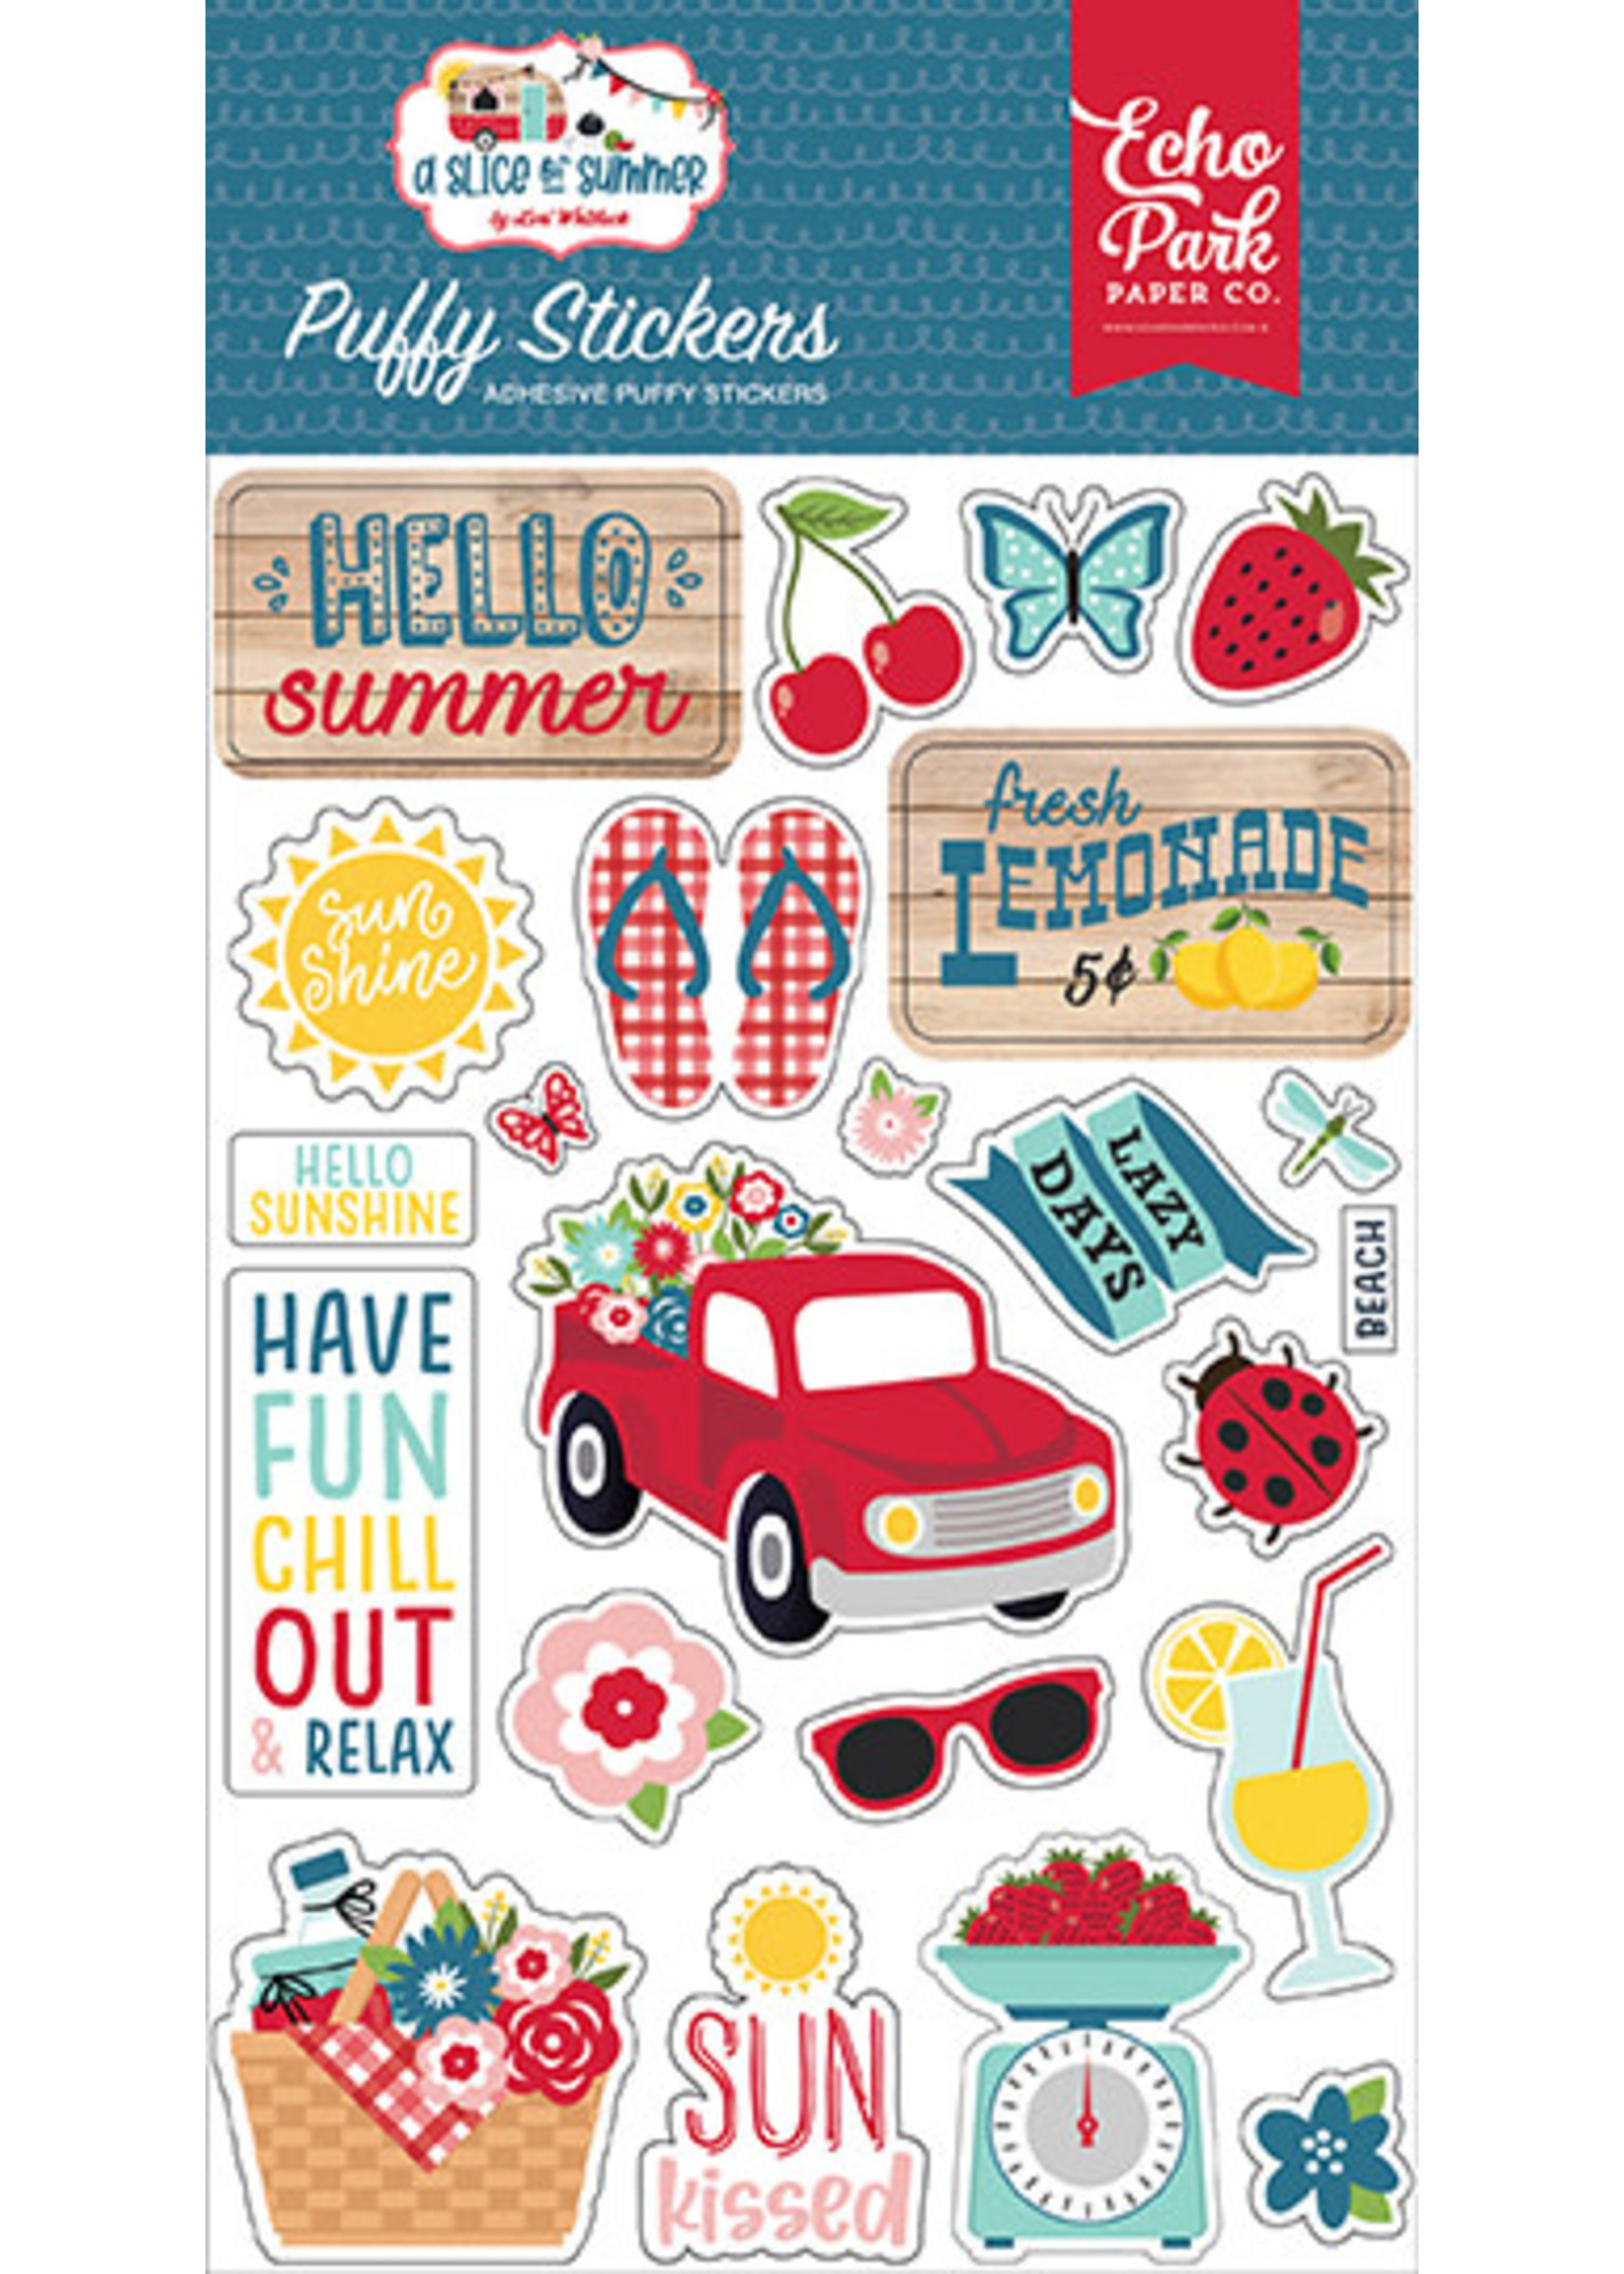 Echo Park A Slice Of Summer:  Puffy Stickers